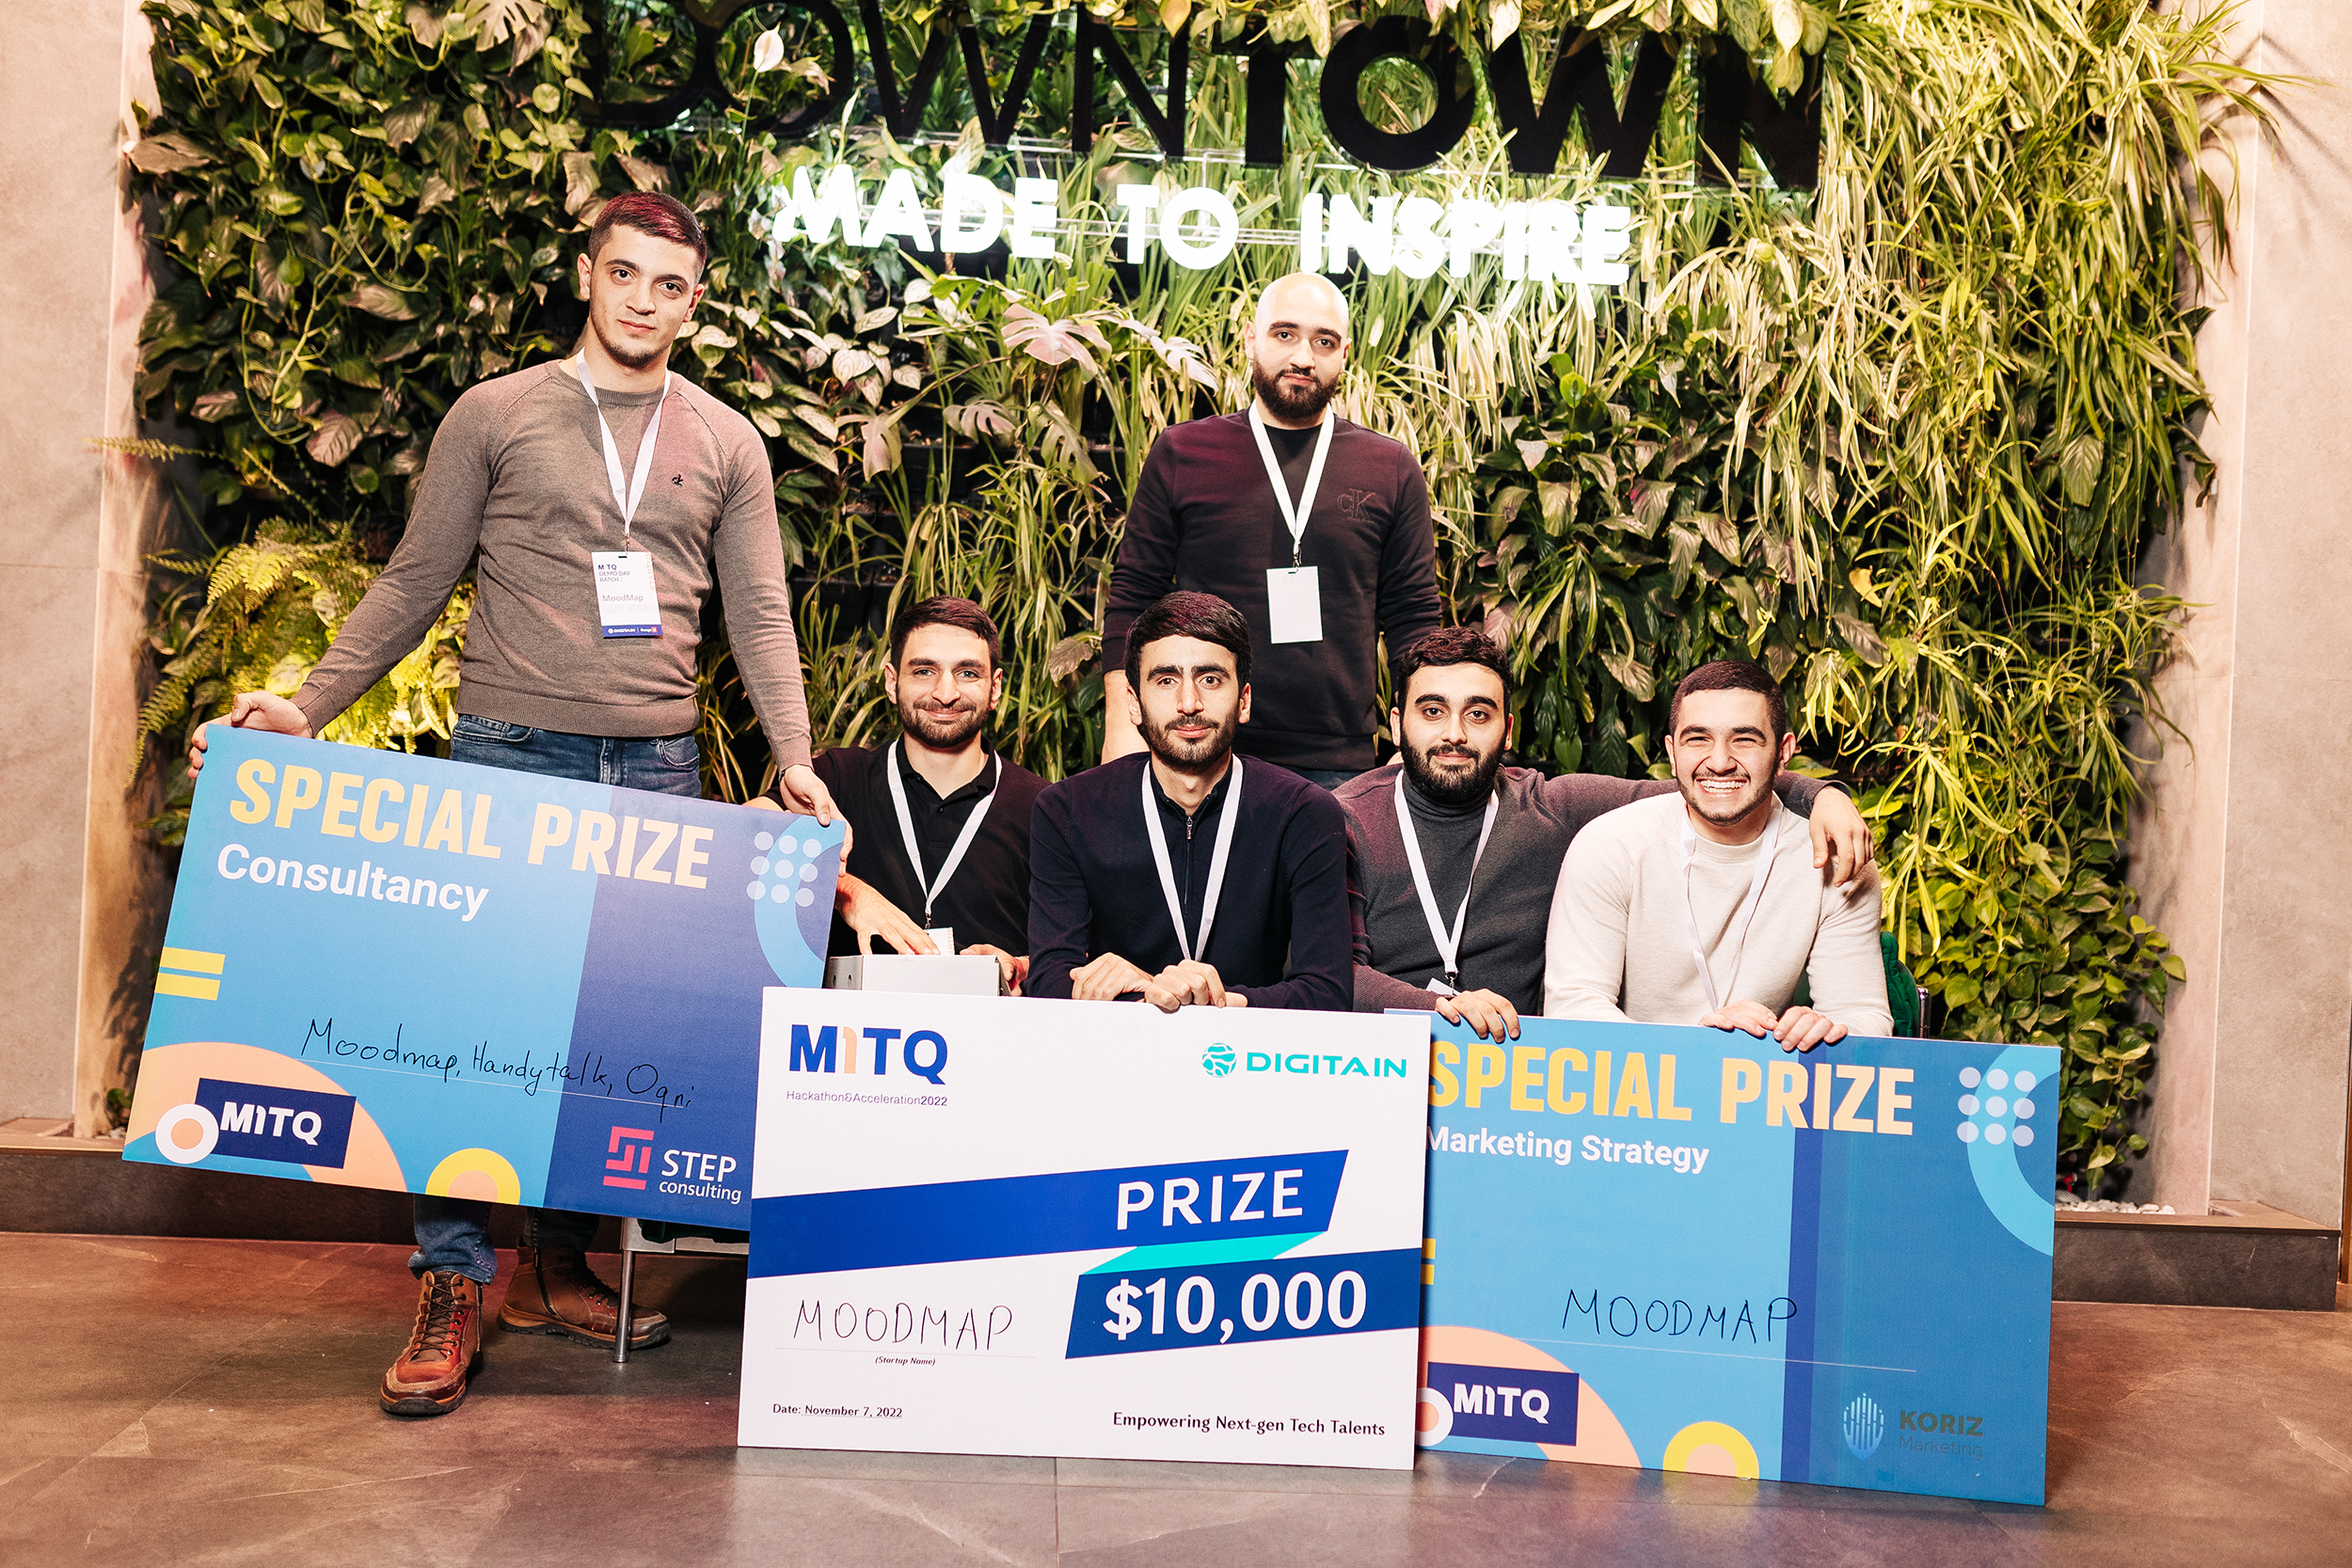 Digitain & Garage48 Wrapped Up the Second Batch of the M1TQ Program with the Demo Day